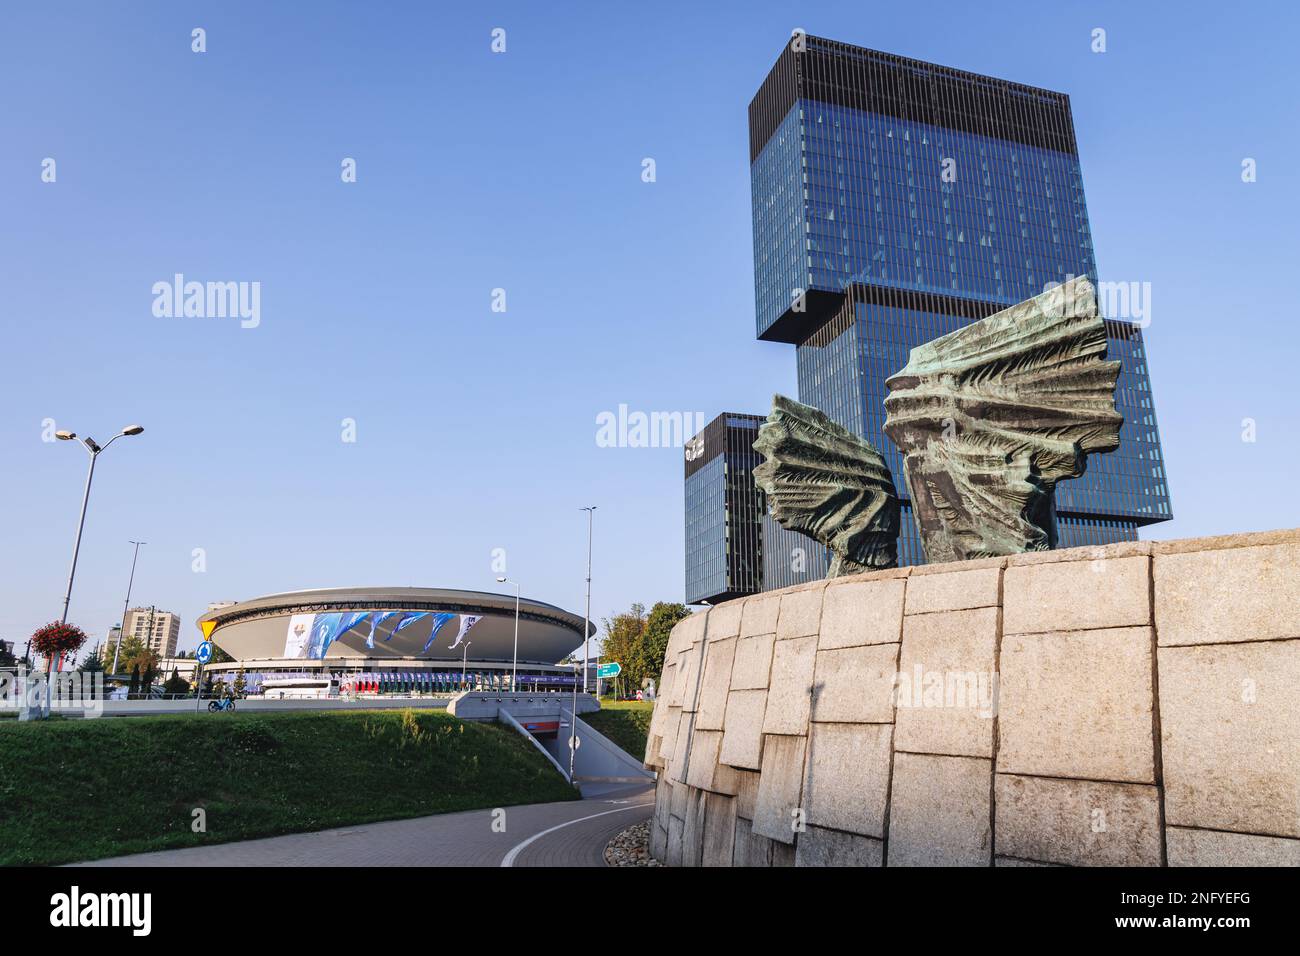 Silesian Insurgents Monument, .KTW office building and Spodek Arena in Katowice city, Silesia region of Poland Stock Photo